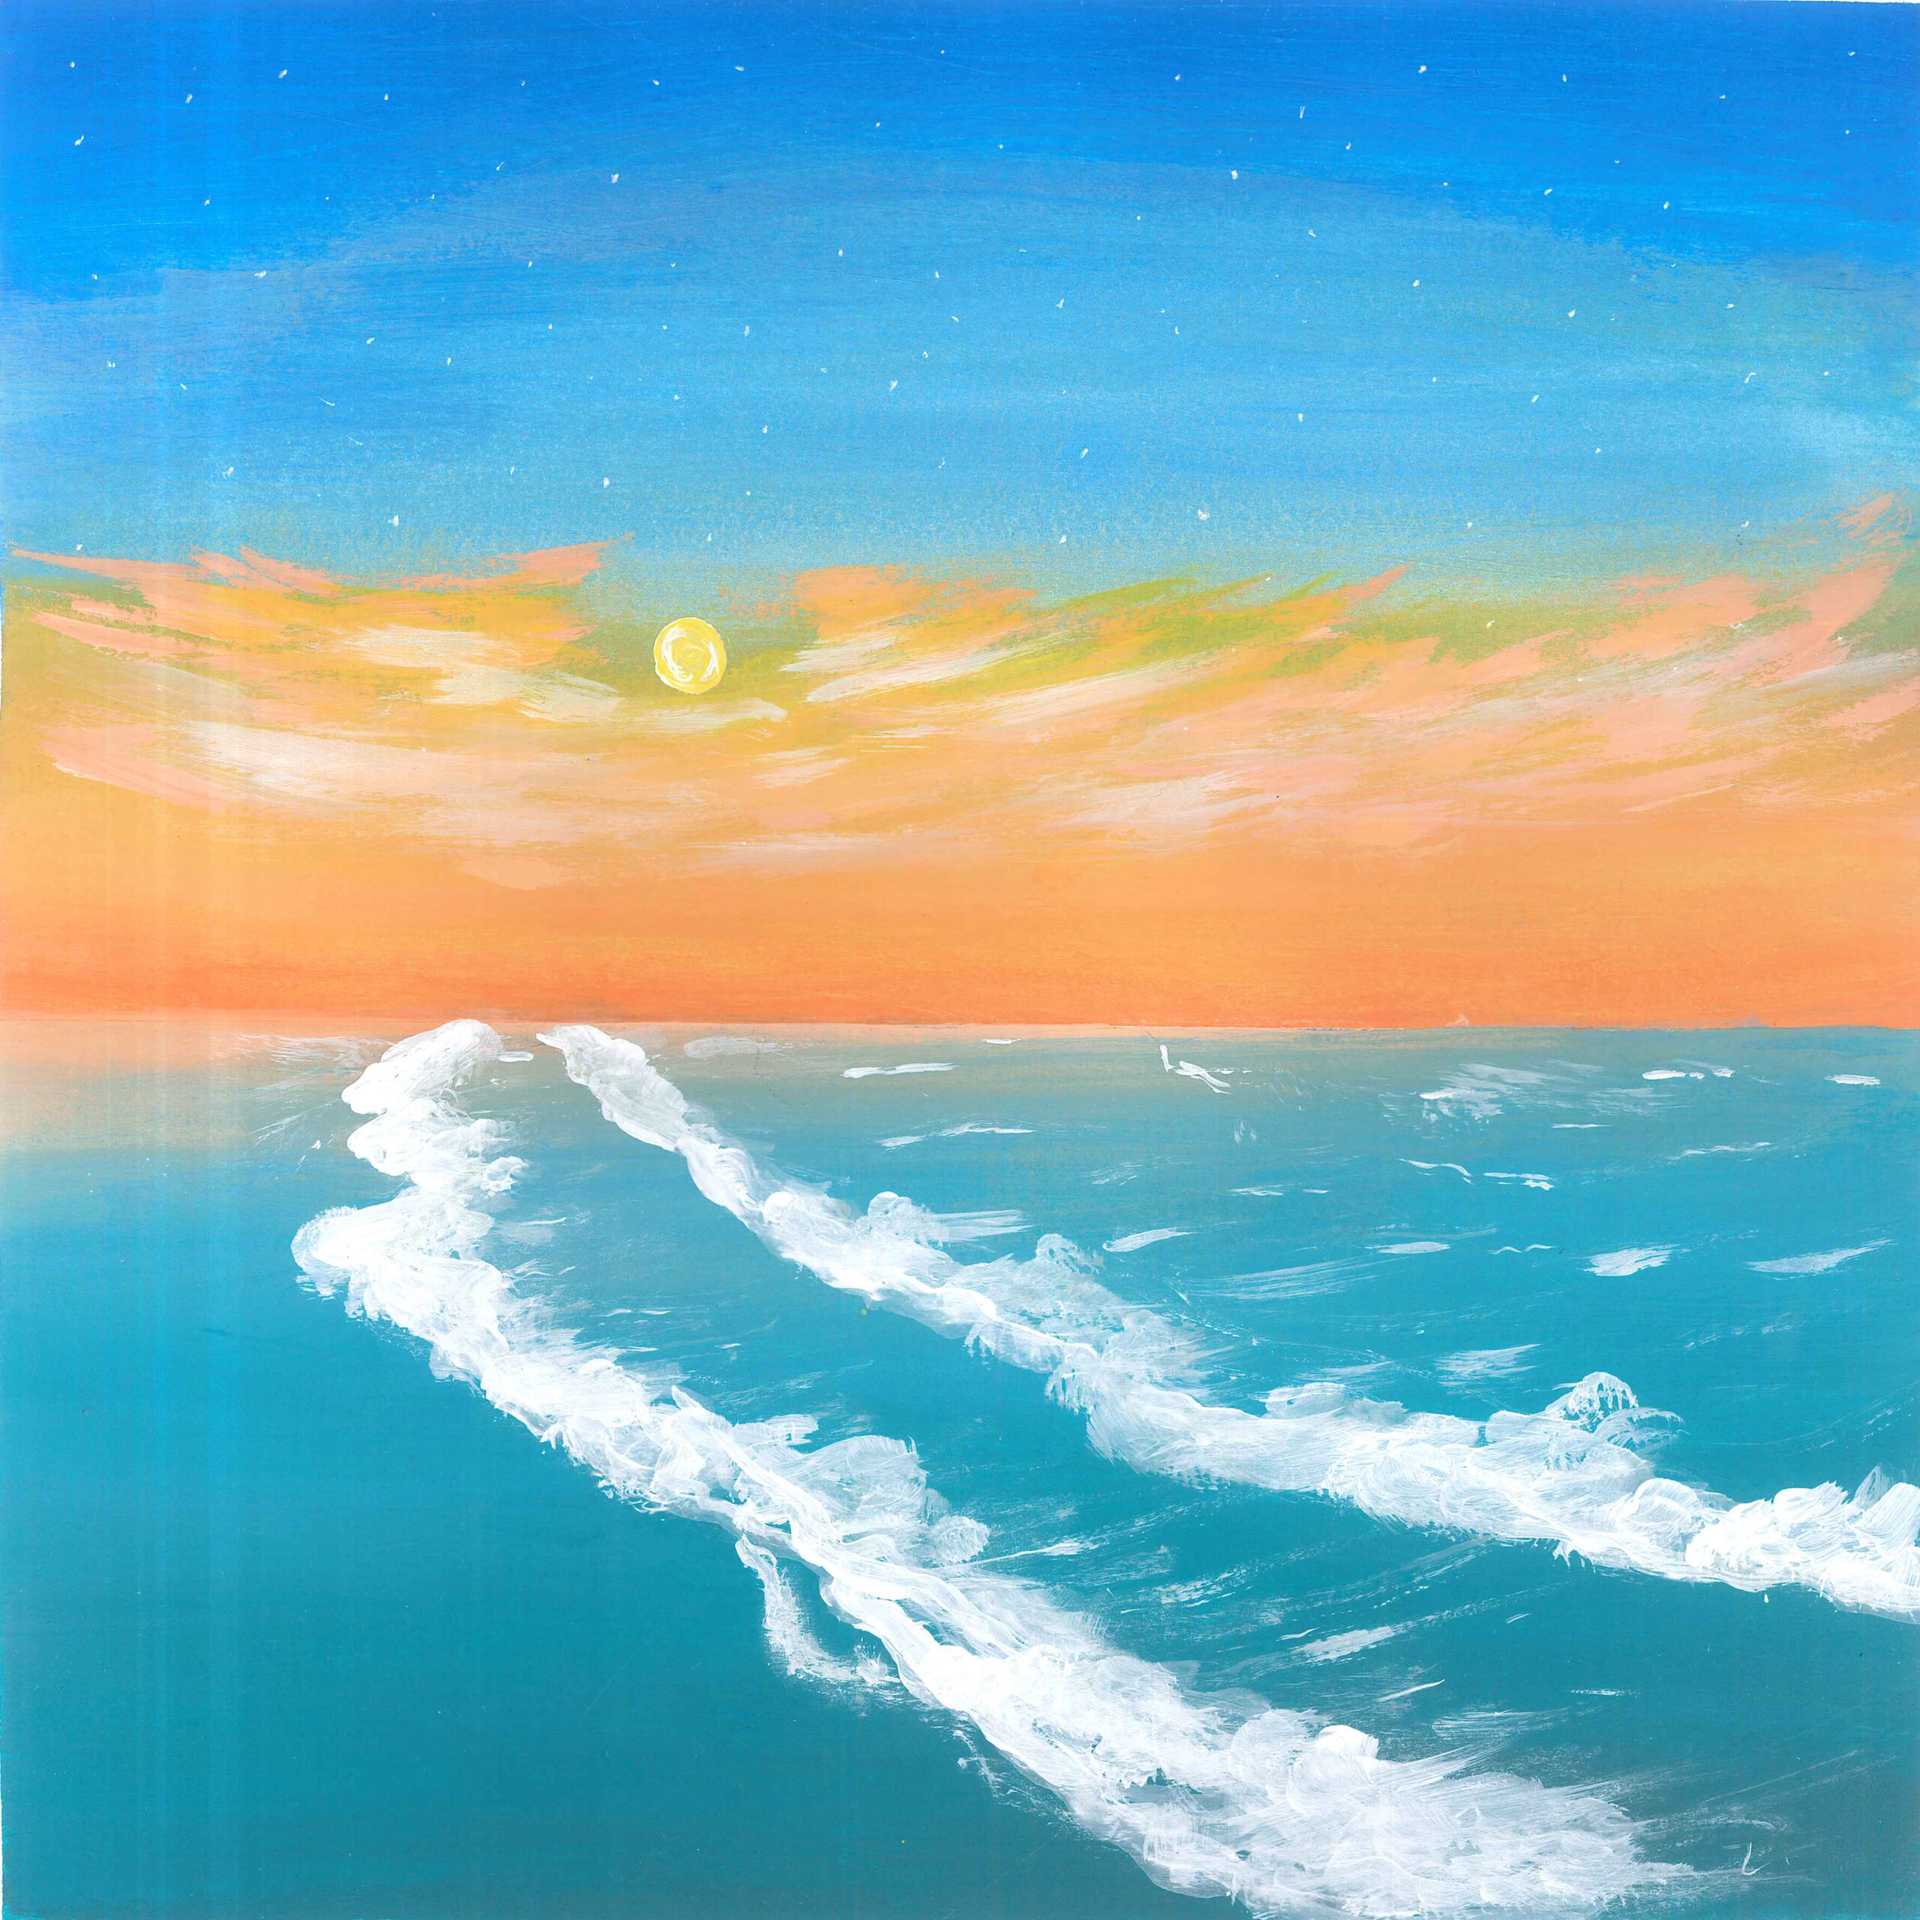 Ocean Waves at Stinson Beach - nature landscape painting - earth.fm